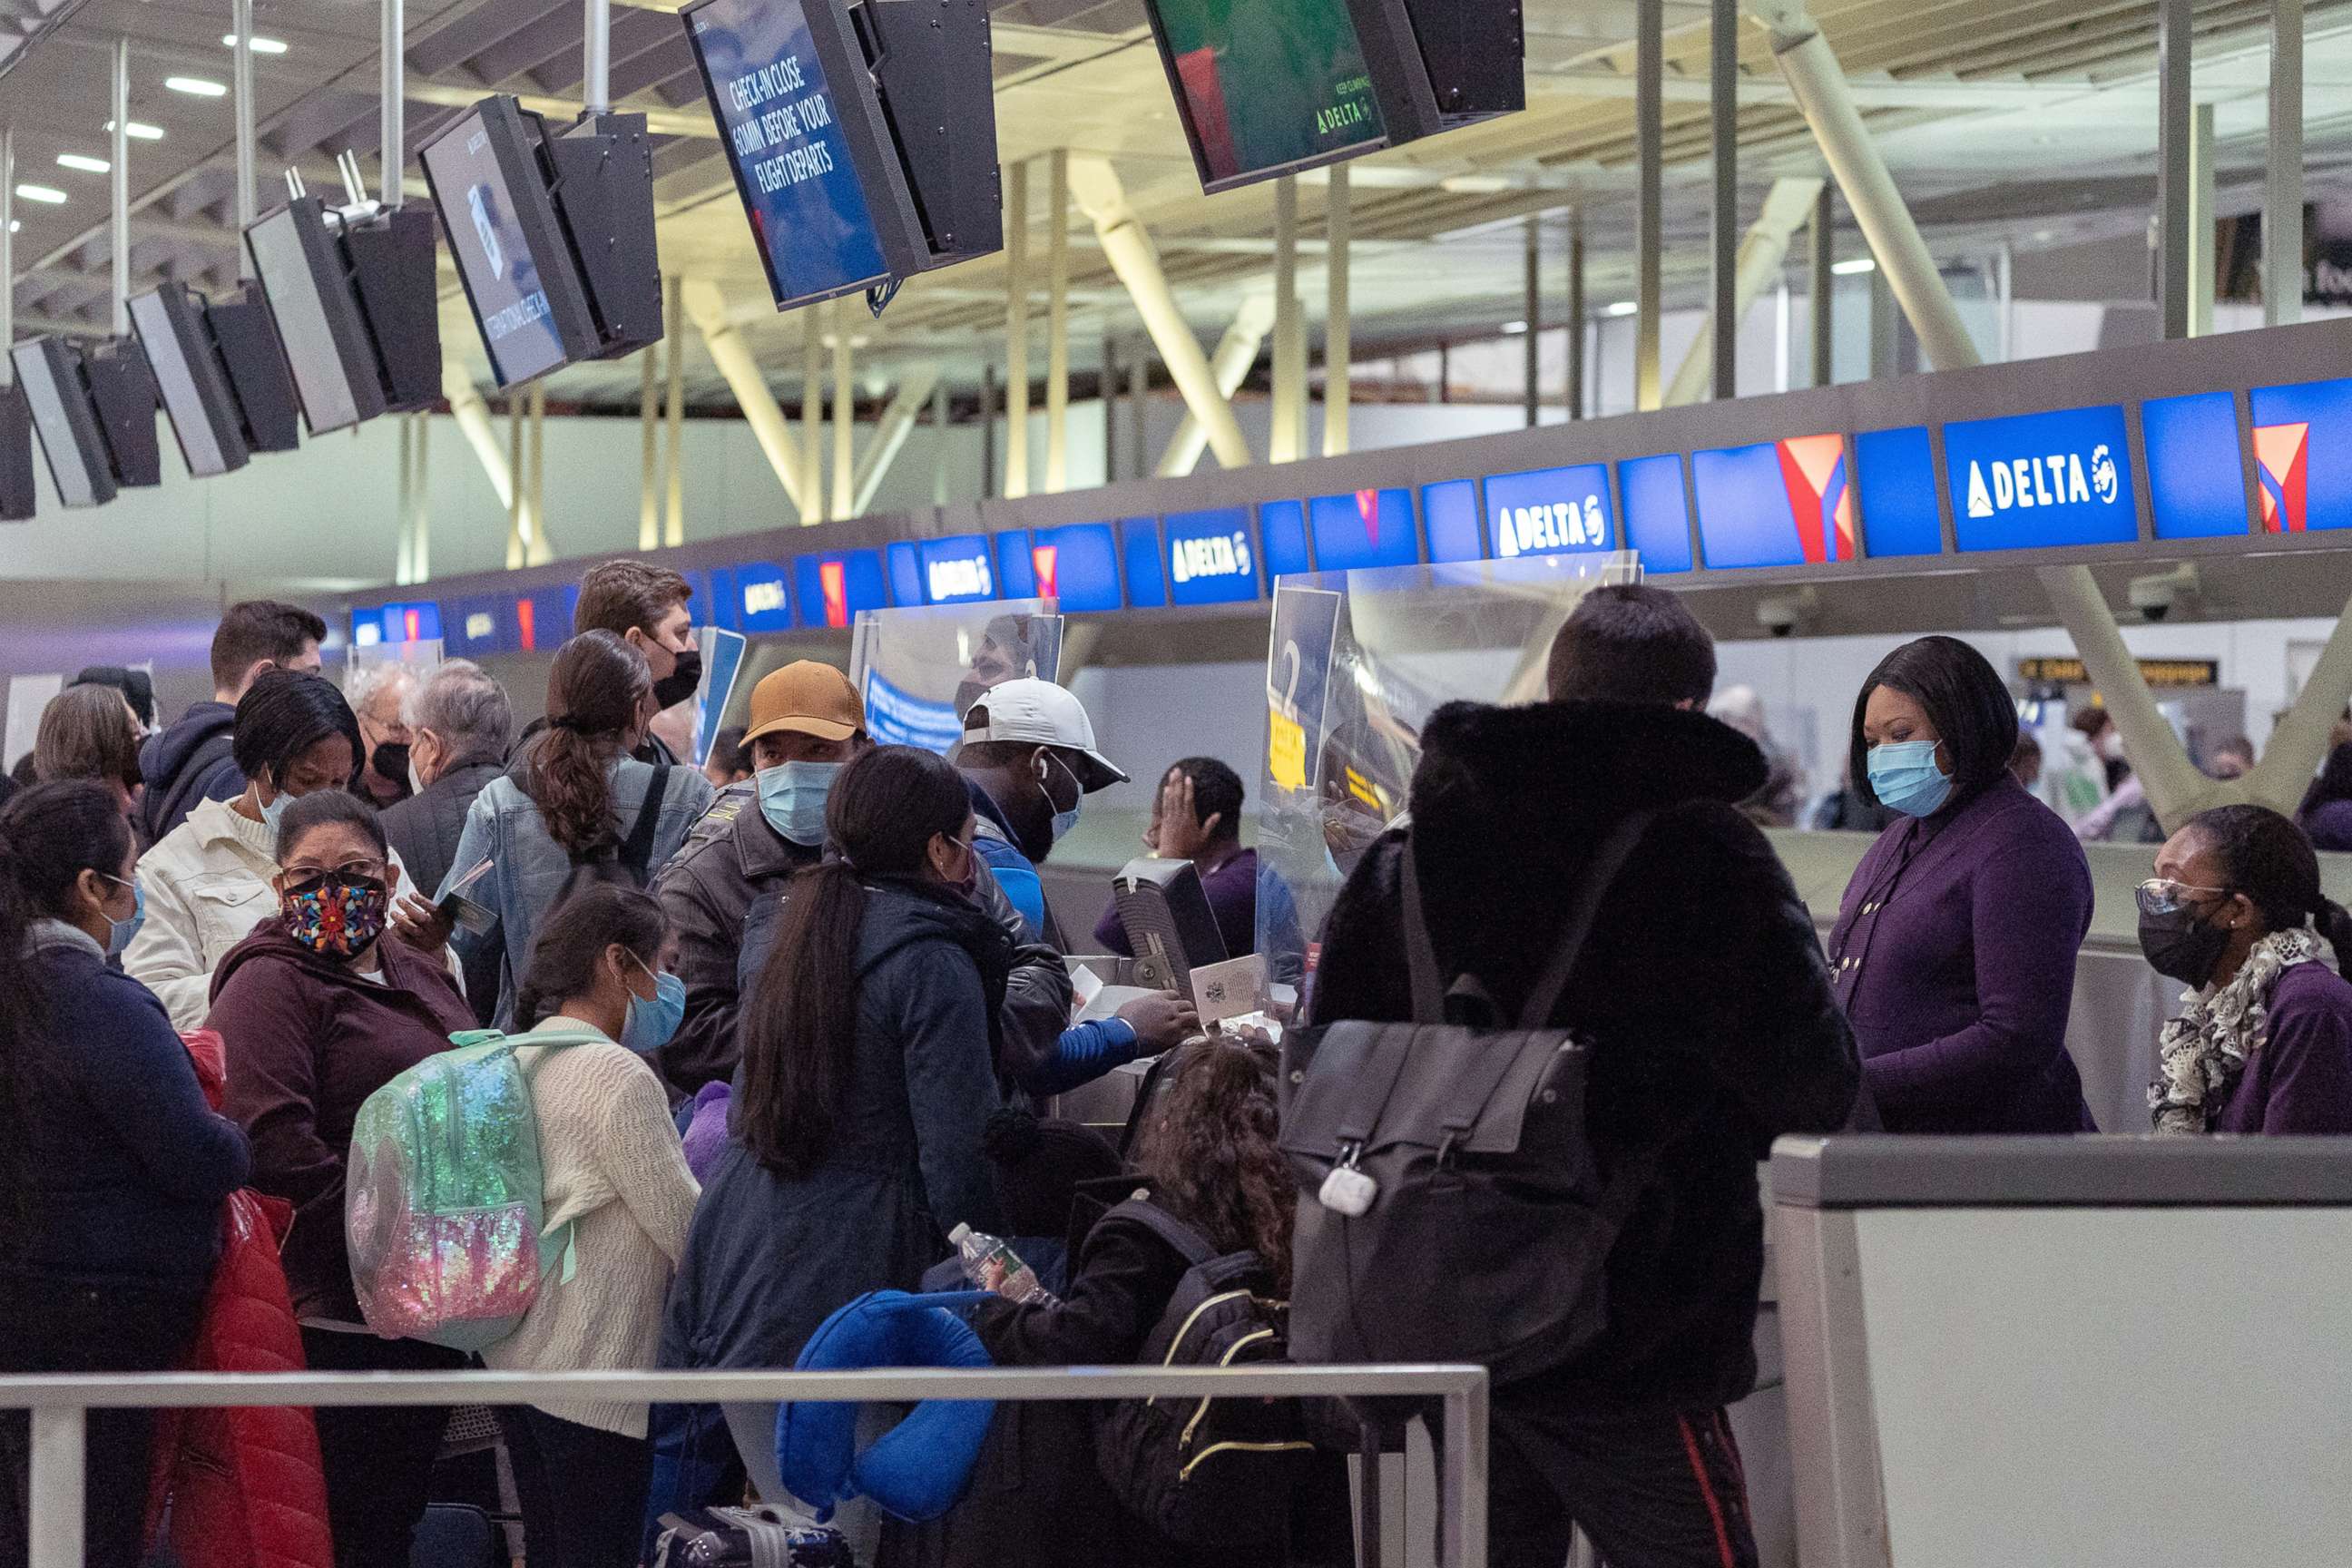 PHOTO: Travelers check in at John F. Kennedy International Airport during the spread of the Omicron coronavirus variant in Queens, New York, Dec. 26, 2021.